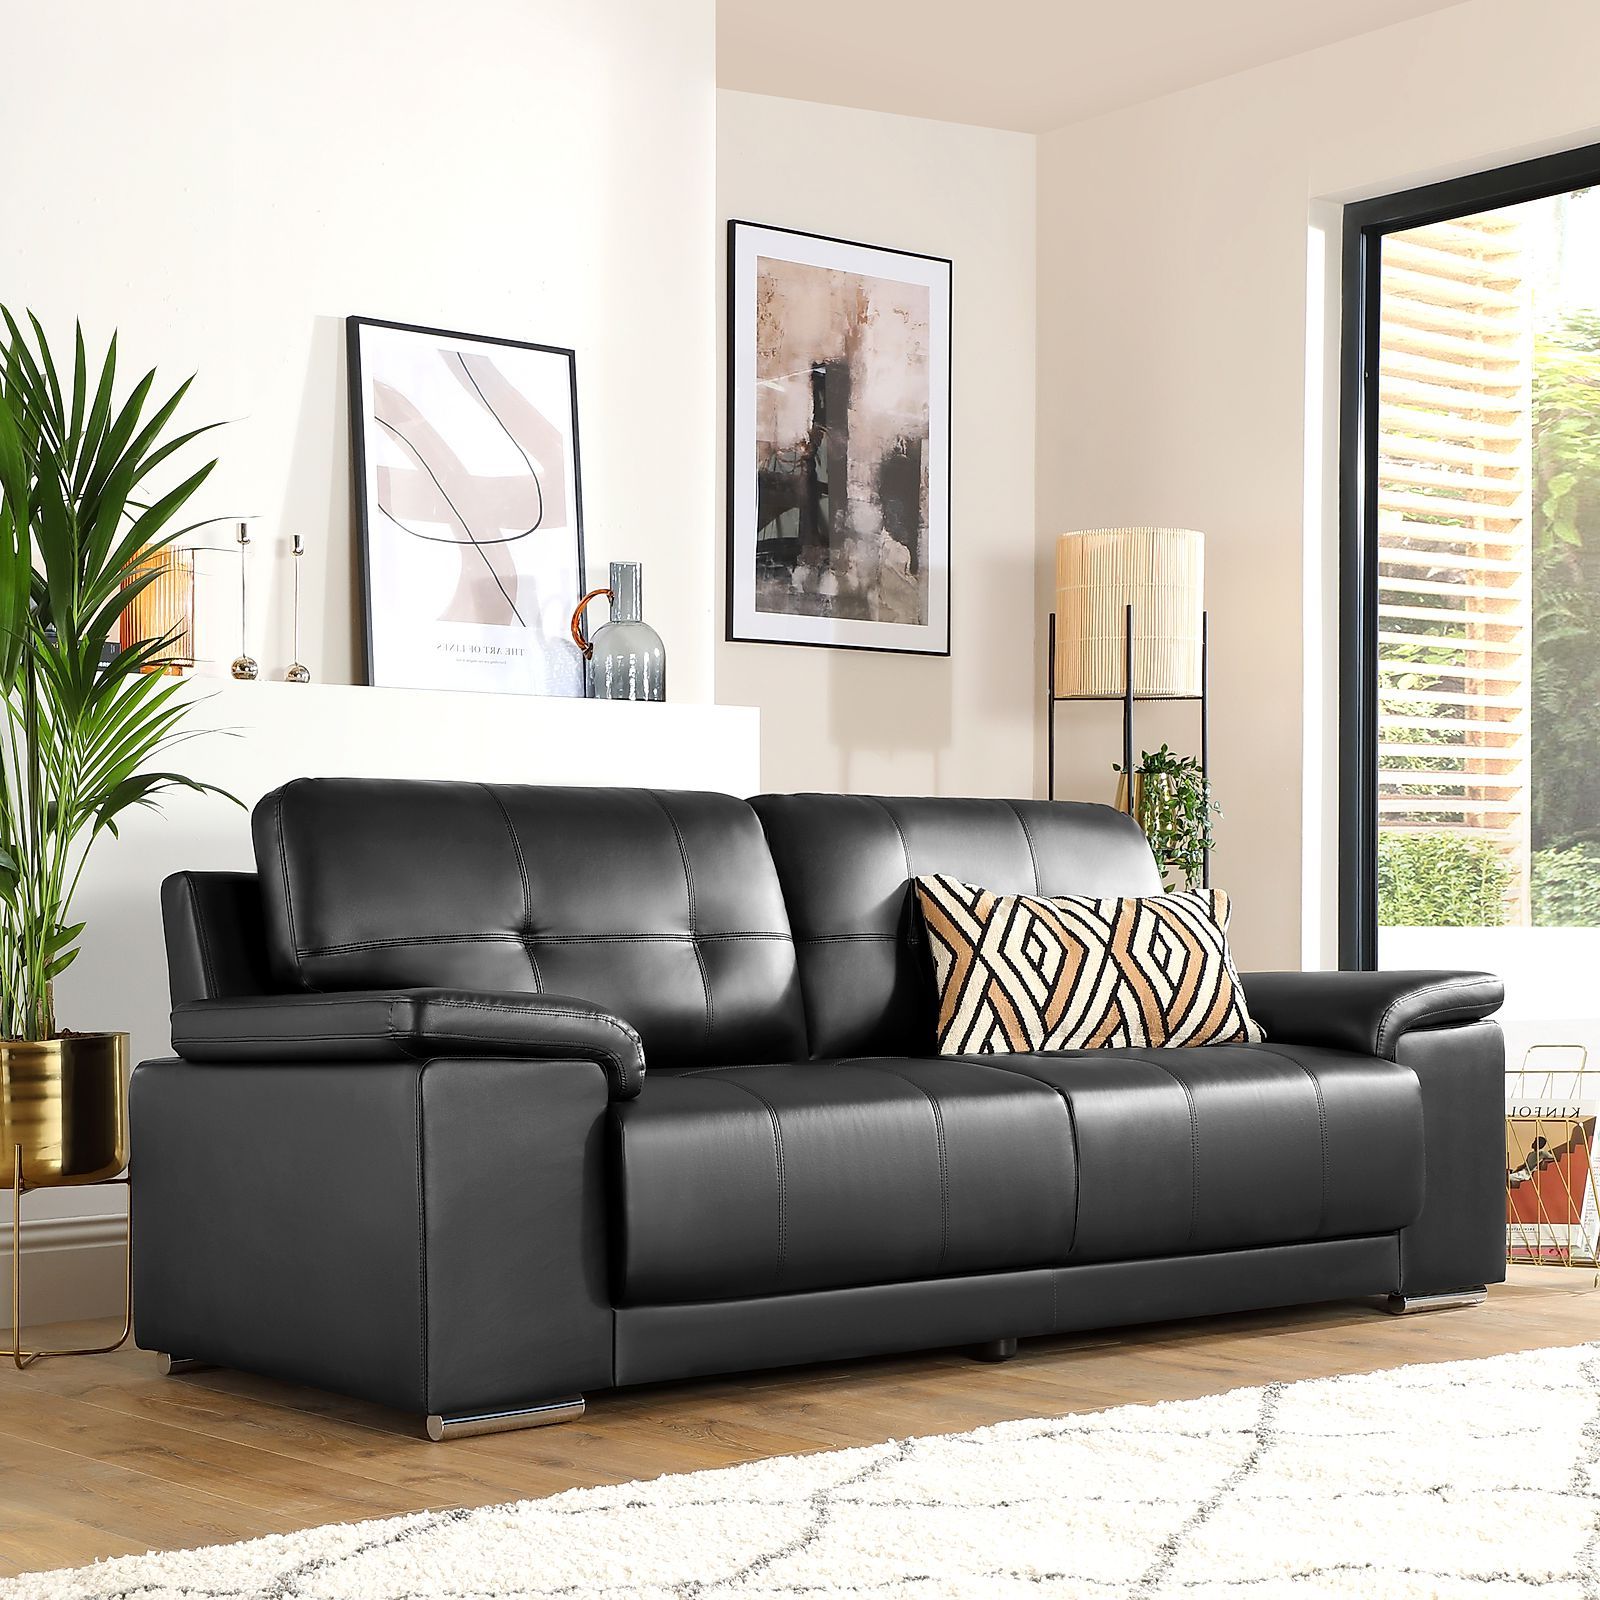 Kansas Black Leather 3 Seater Sofa | Furniture Choice Within 3 Seat L Shaped Sofas In Black (Gallery 8 of 20)